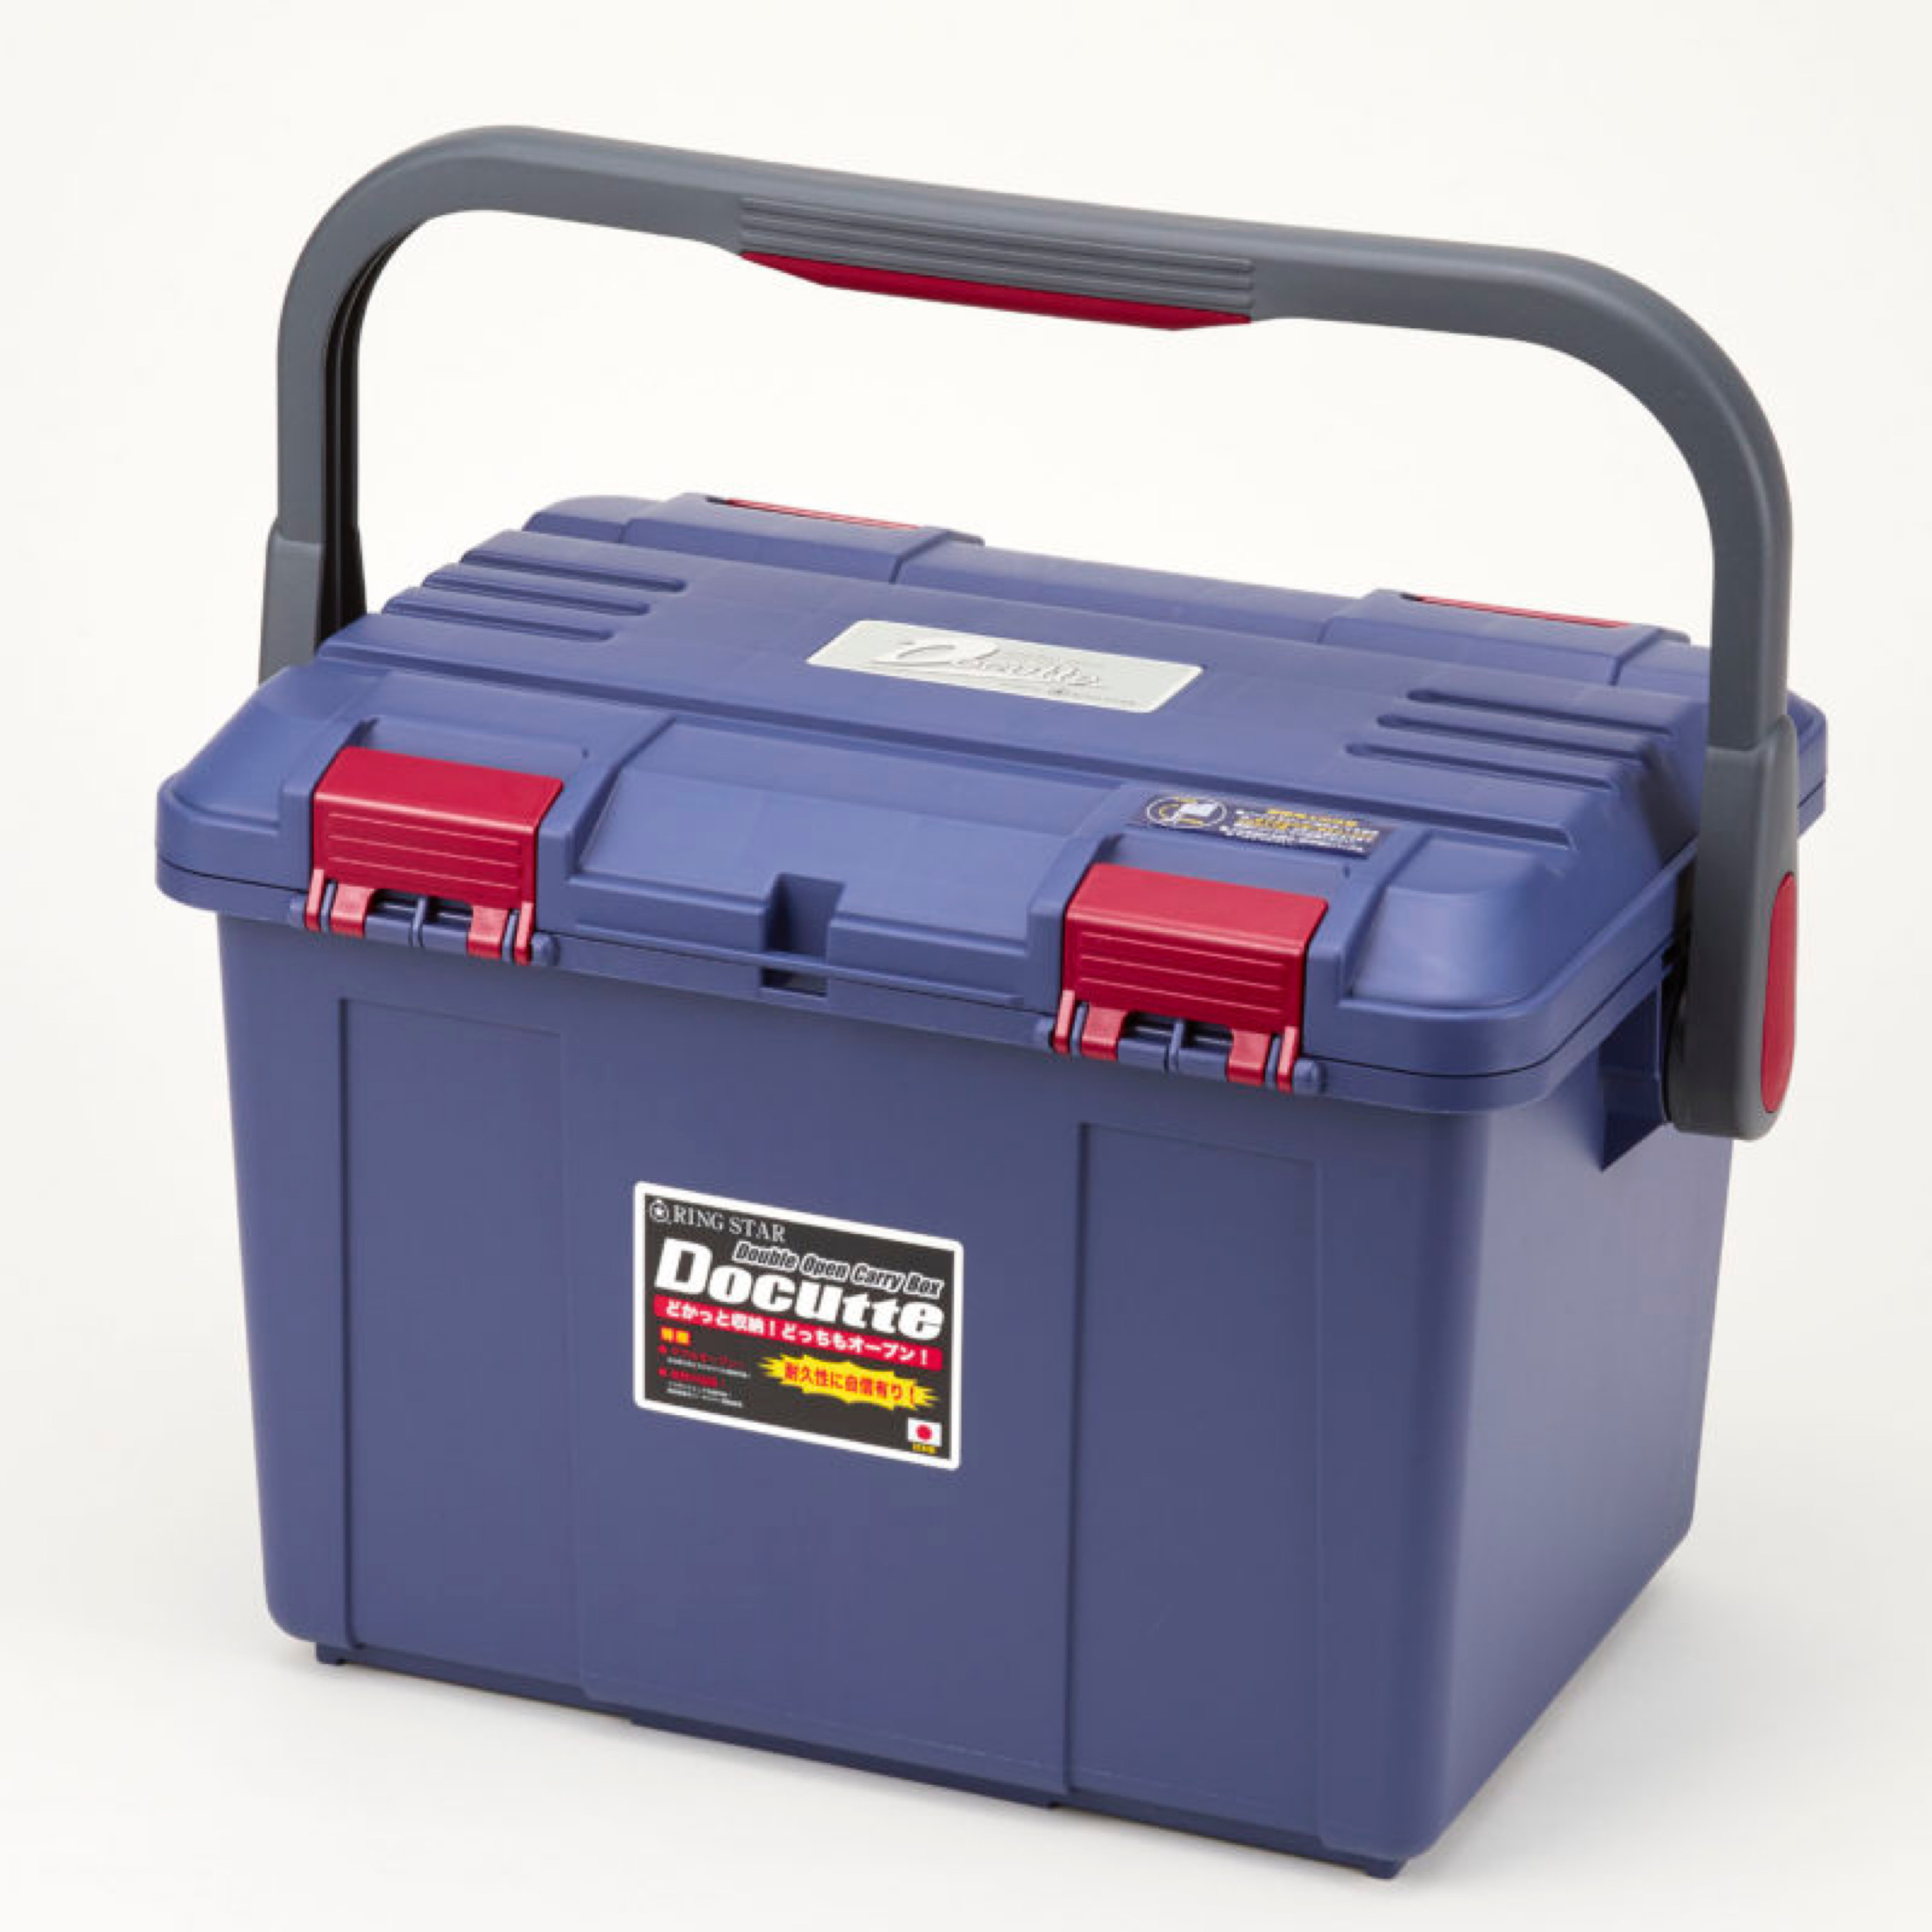 RING STAR DOCUTTE D-5000 TACKLE BOX